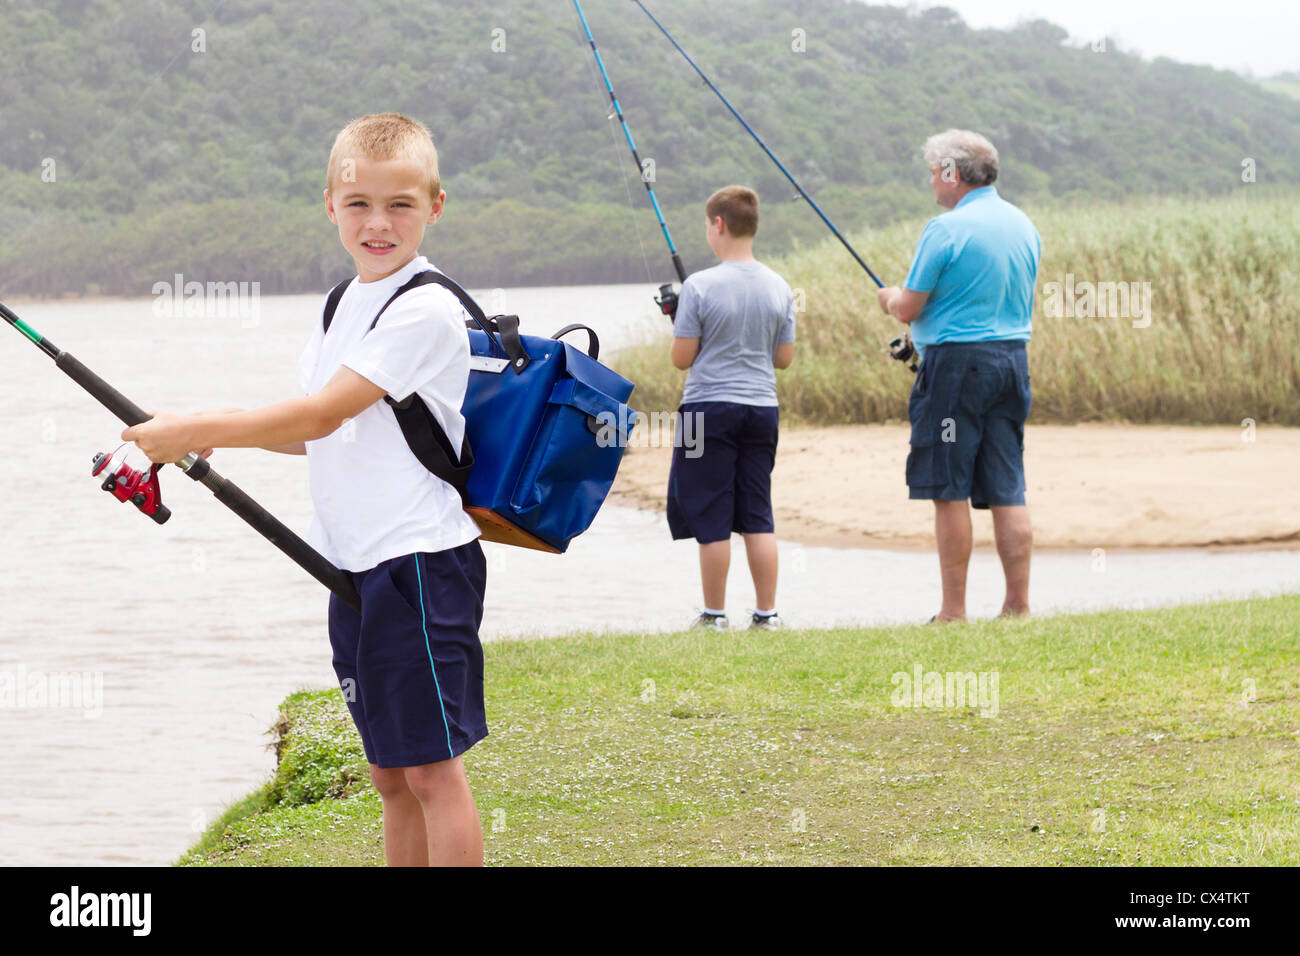 two young boys with fishing gear Stock Photo - Alamy